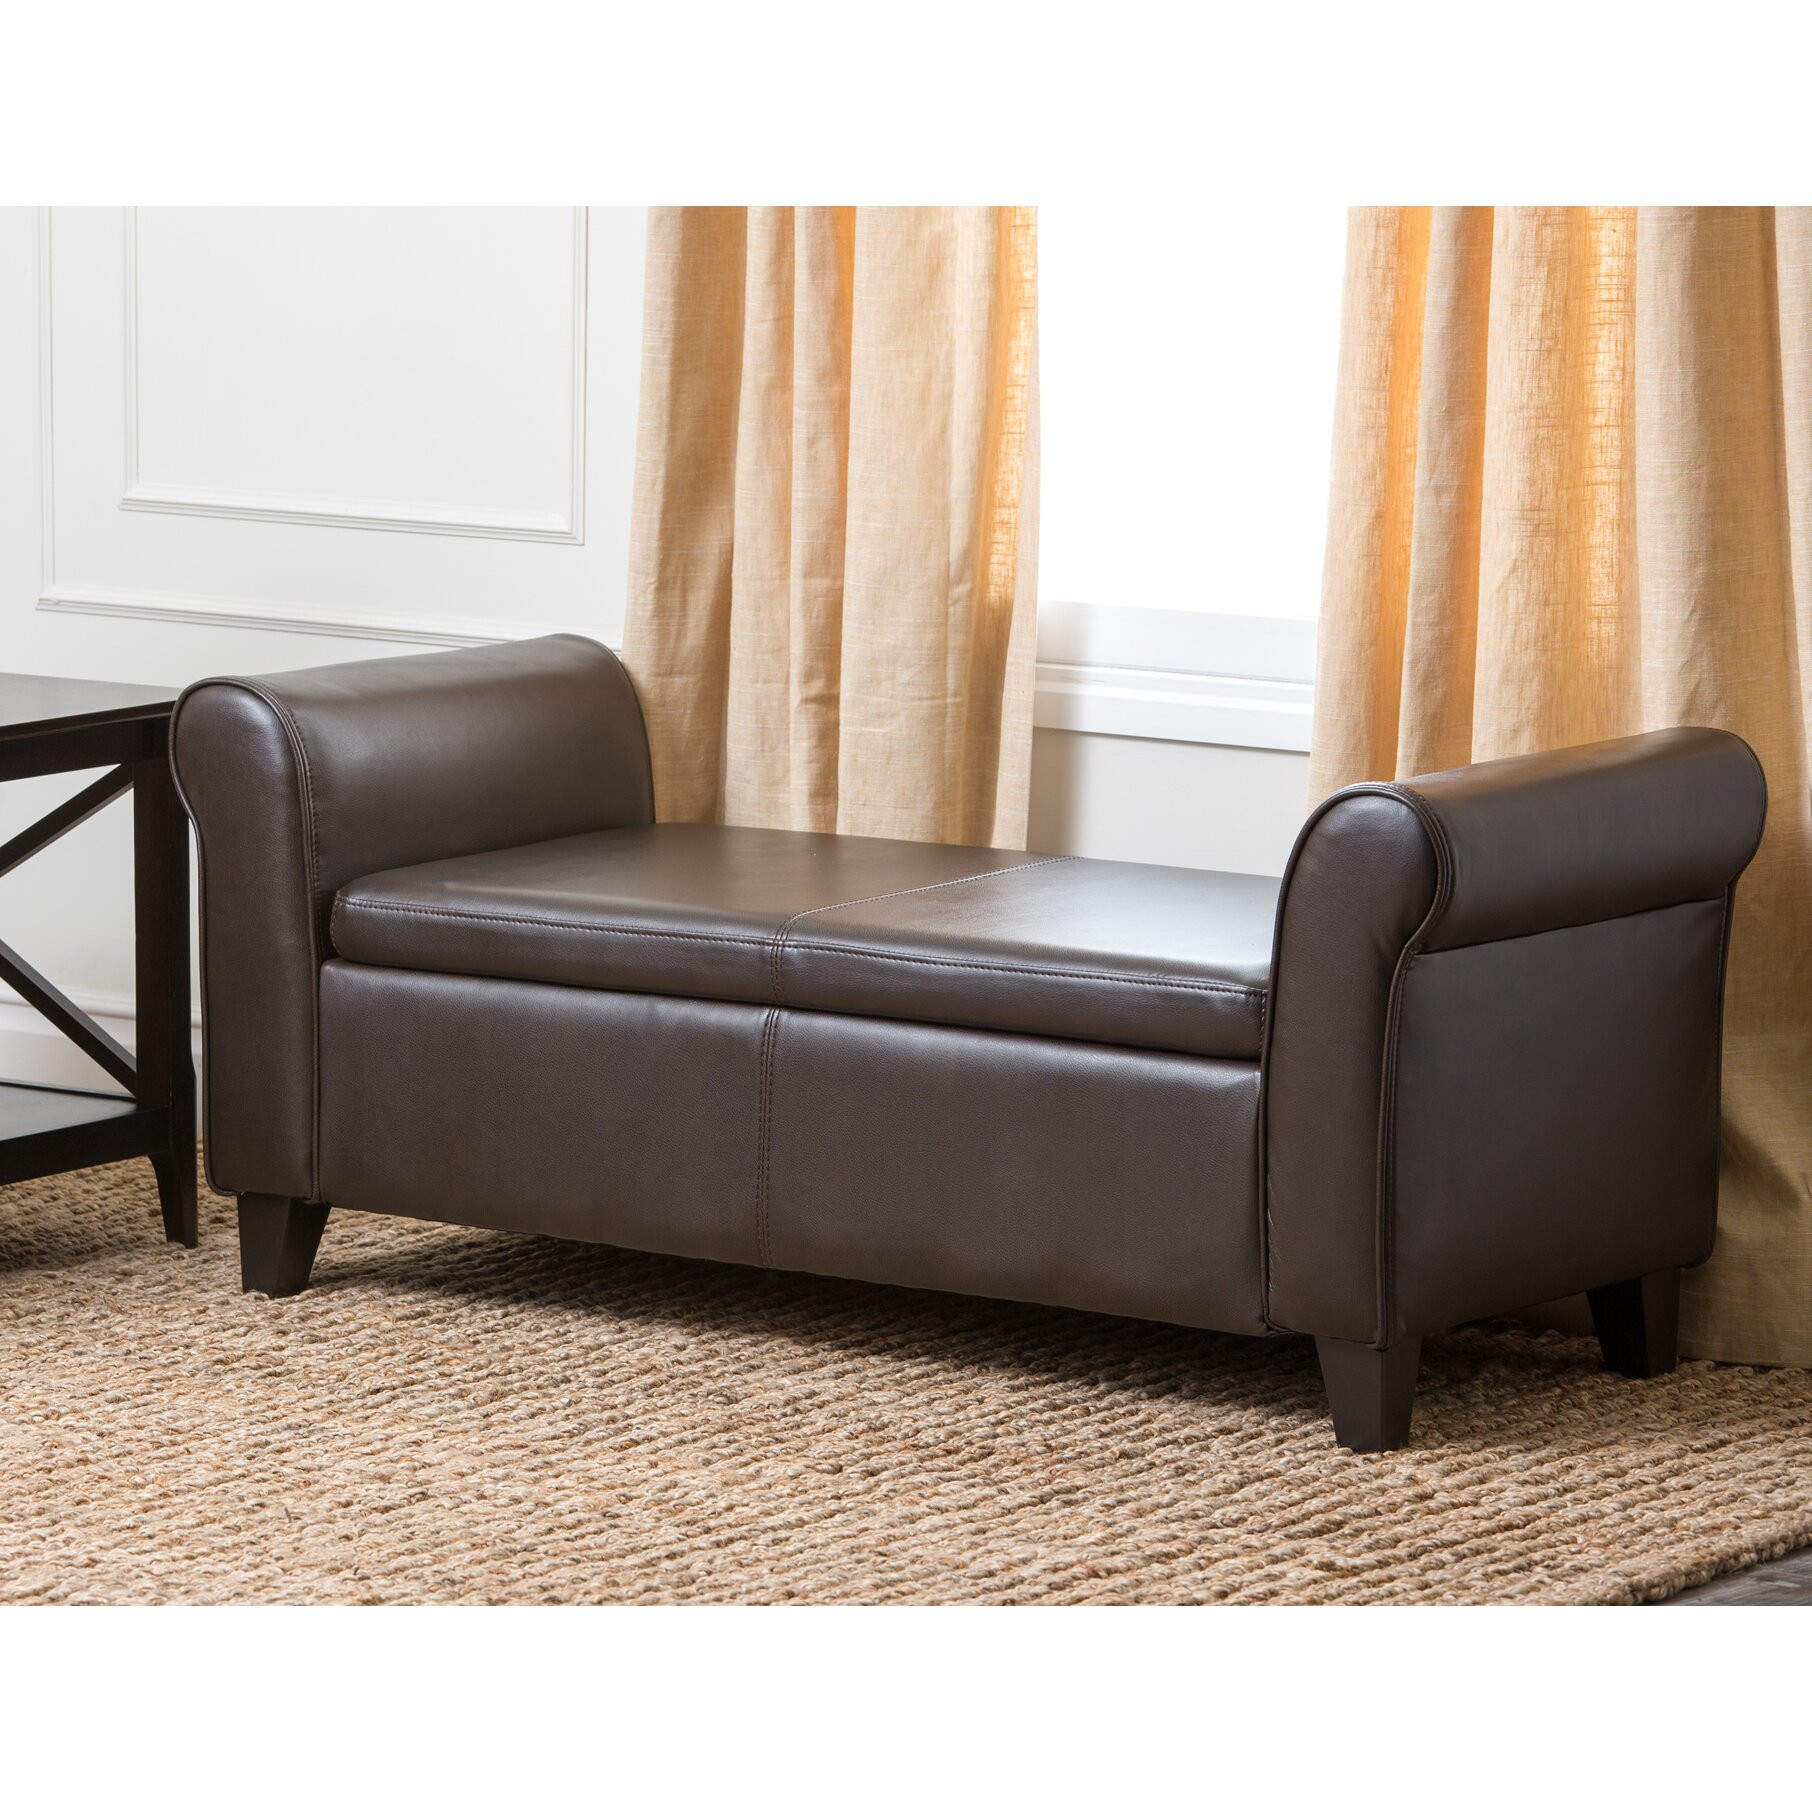 Leather Bench With Storage
 Abbyson Living Easton Leather Bedroom Storage Bench